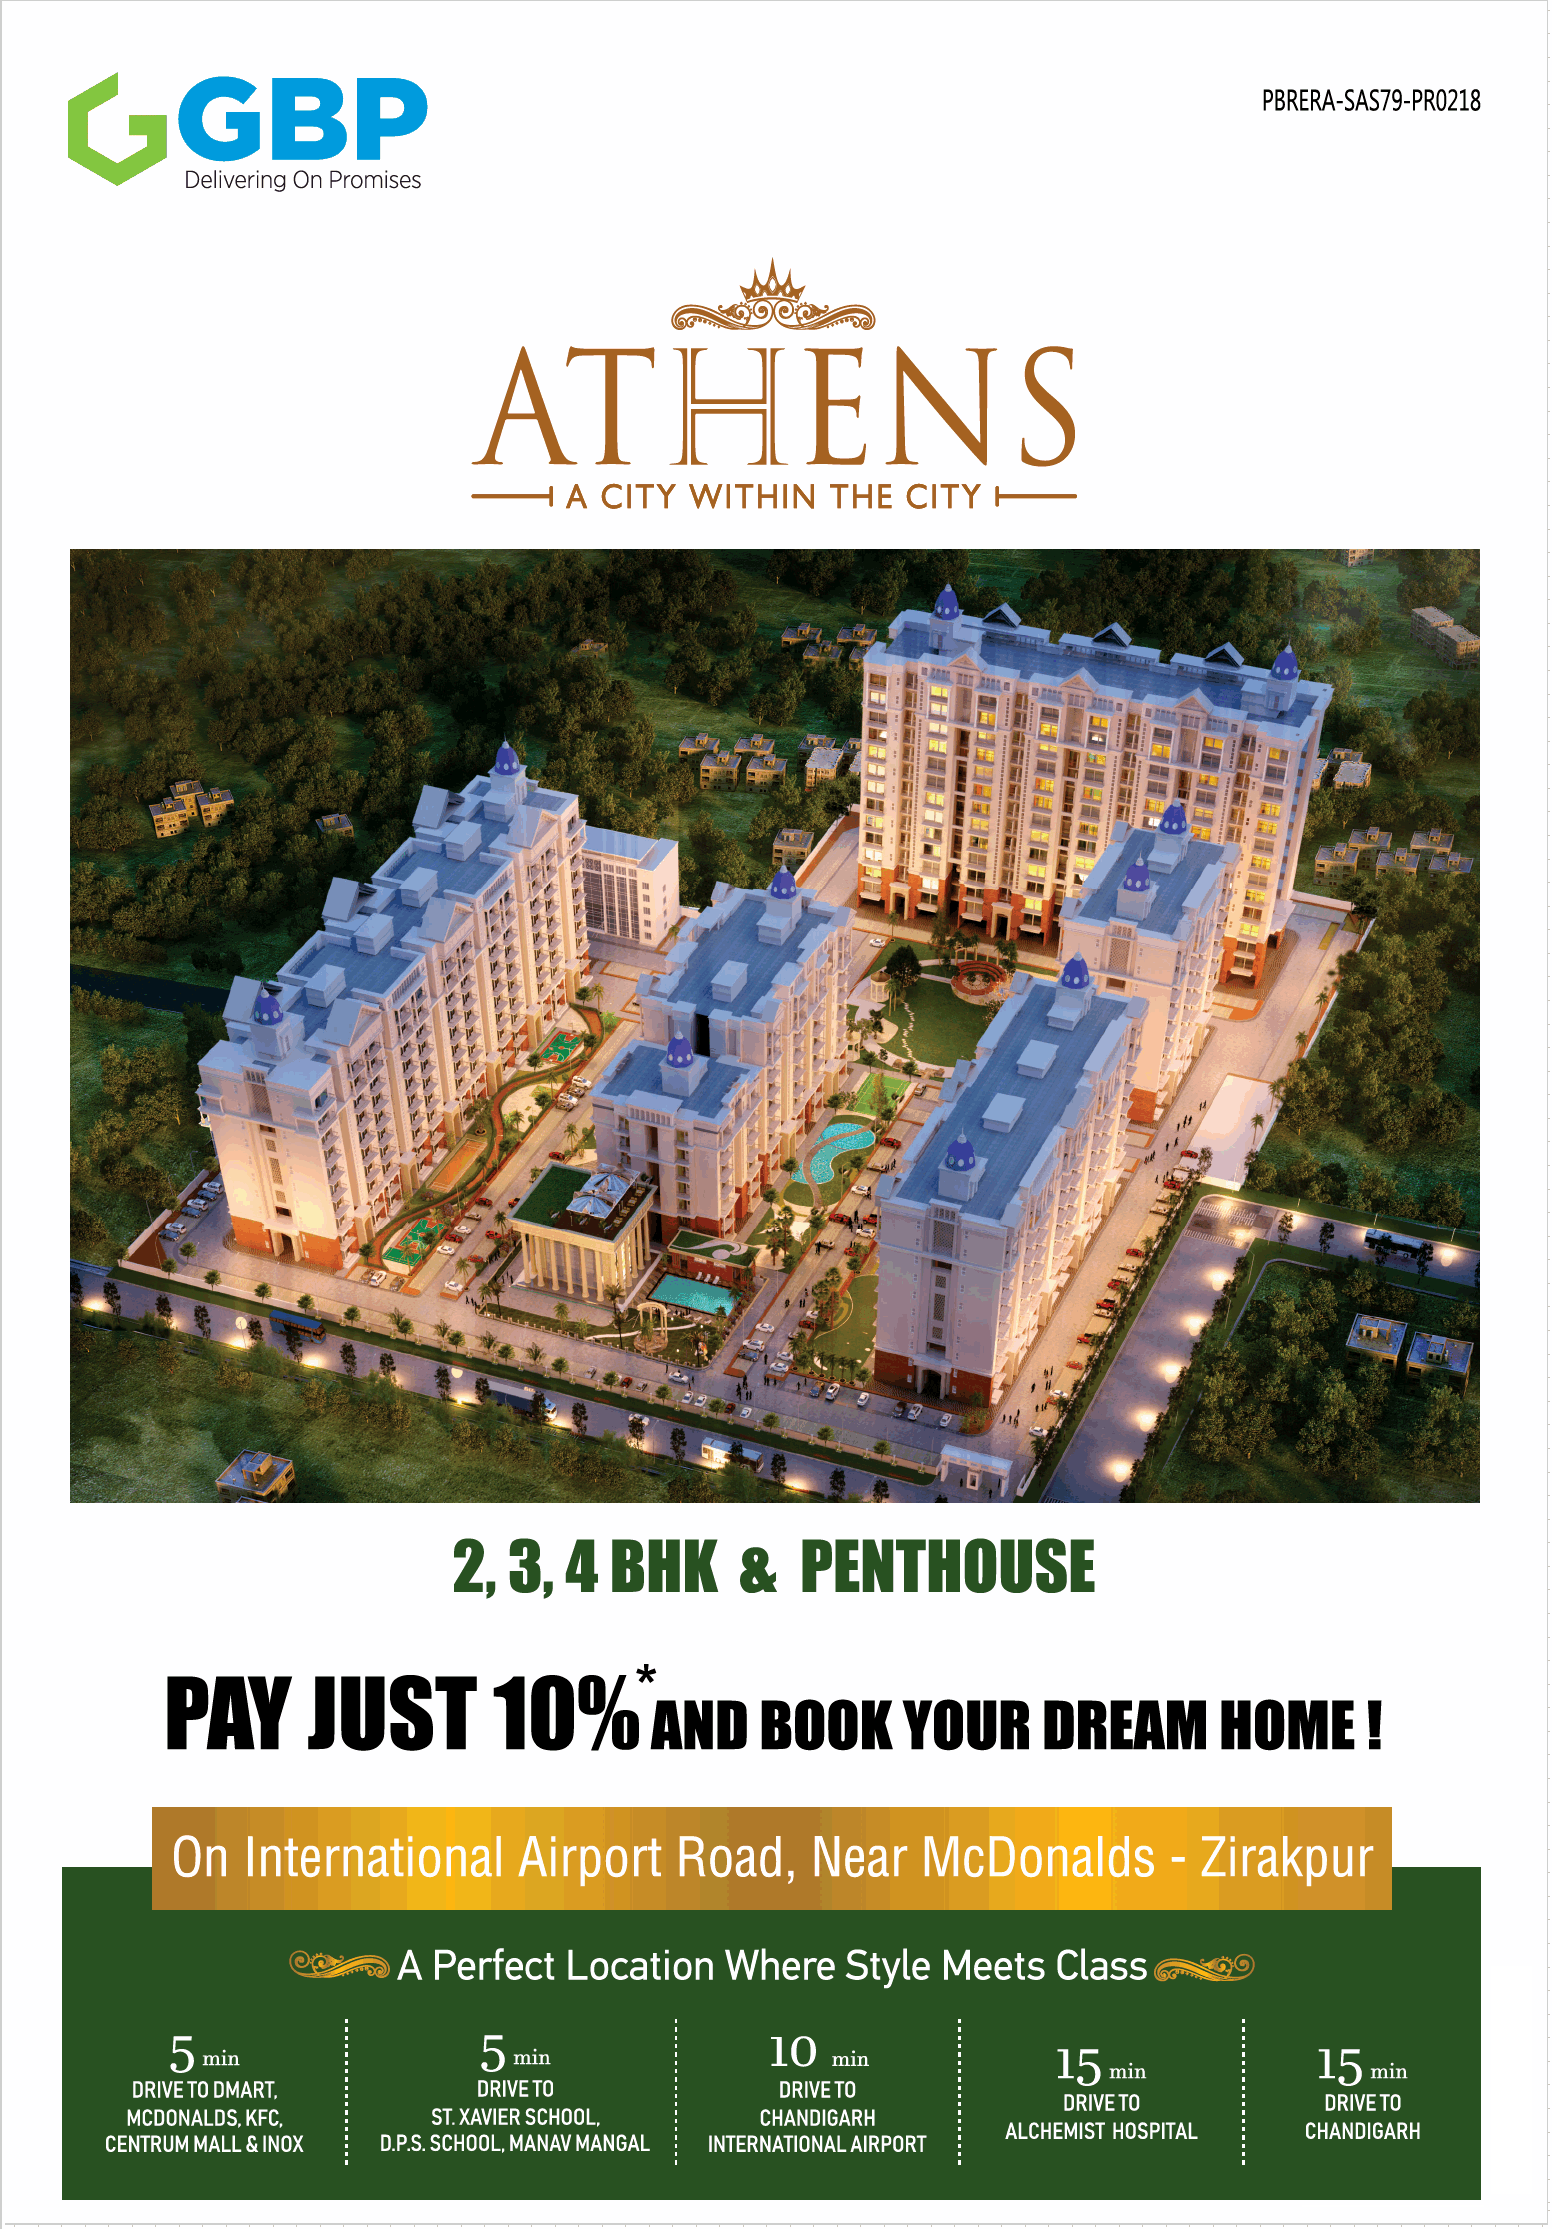 Pay just 10% & book your dream home at GBP Athens in Chandigarh